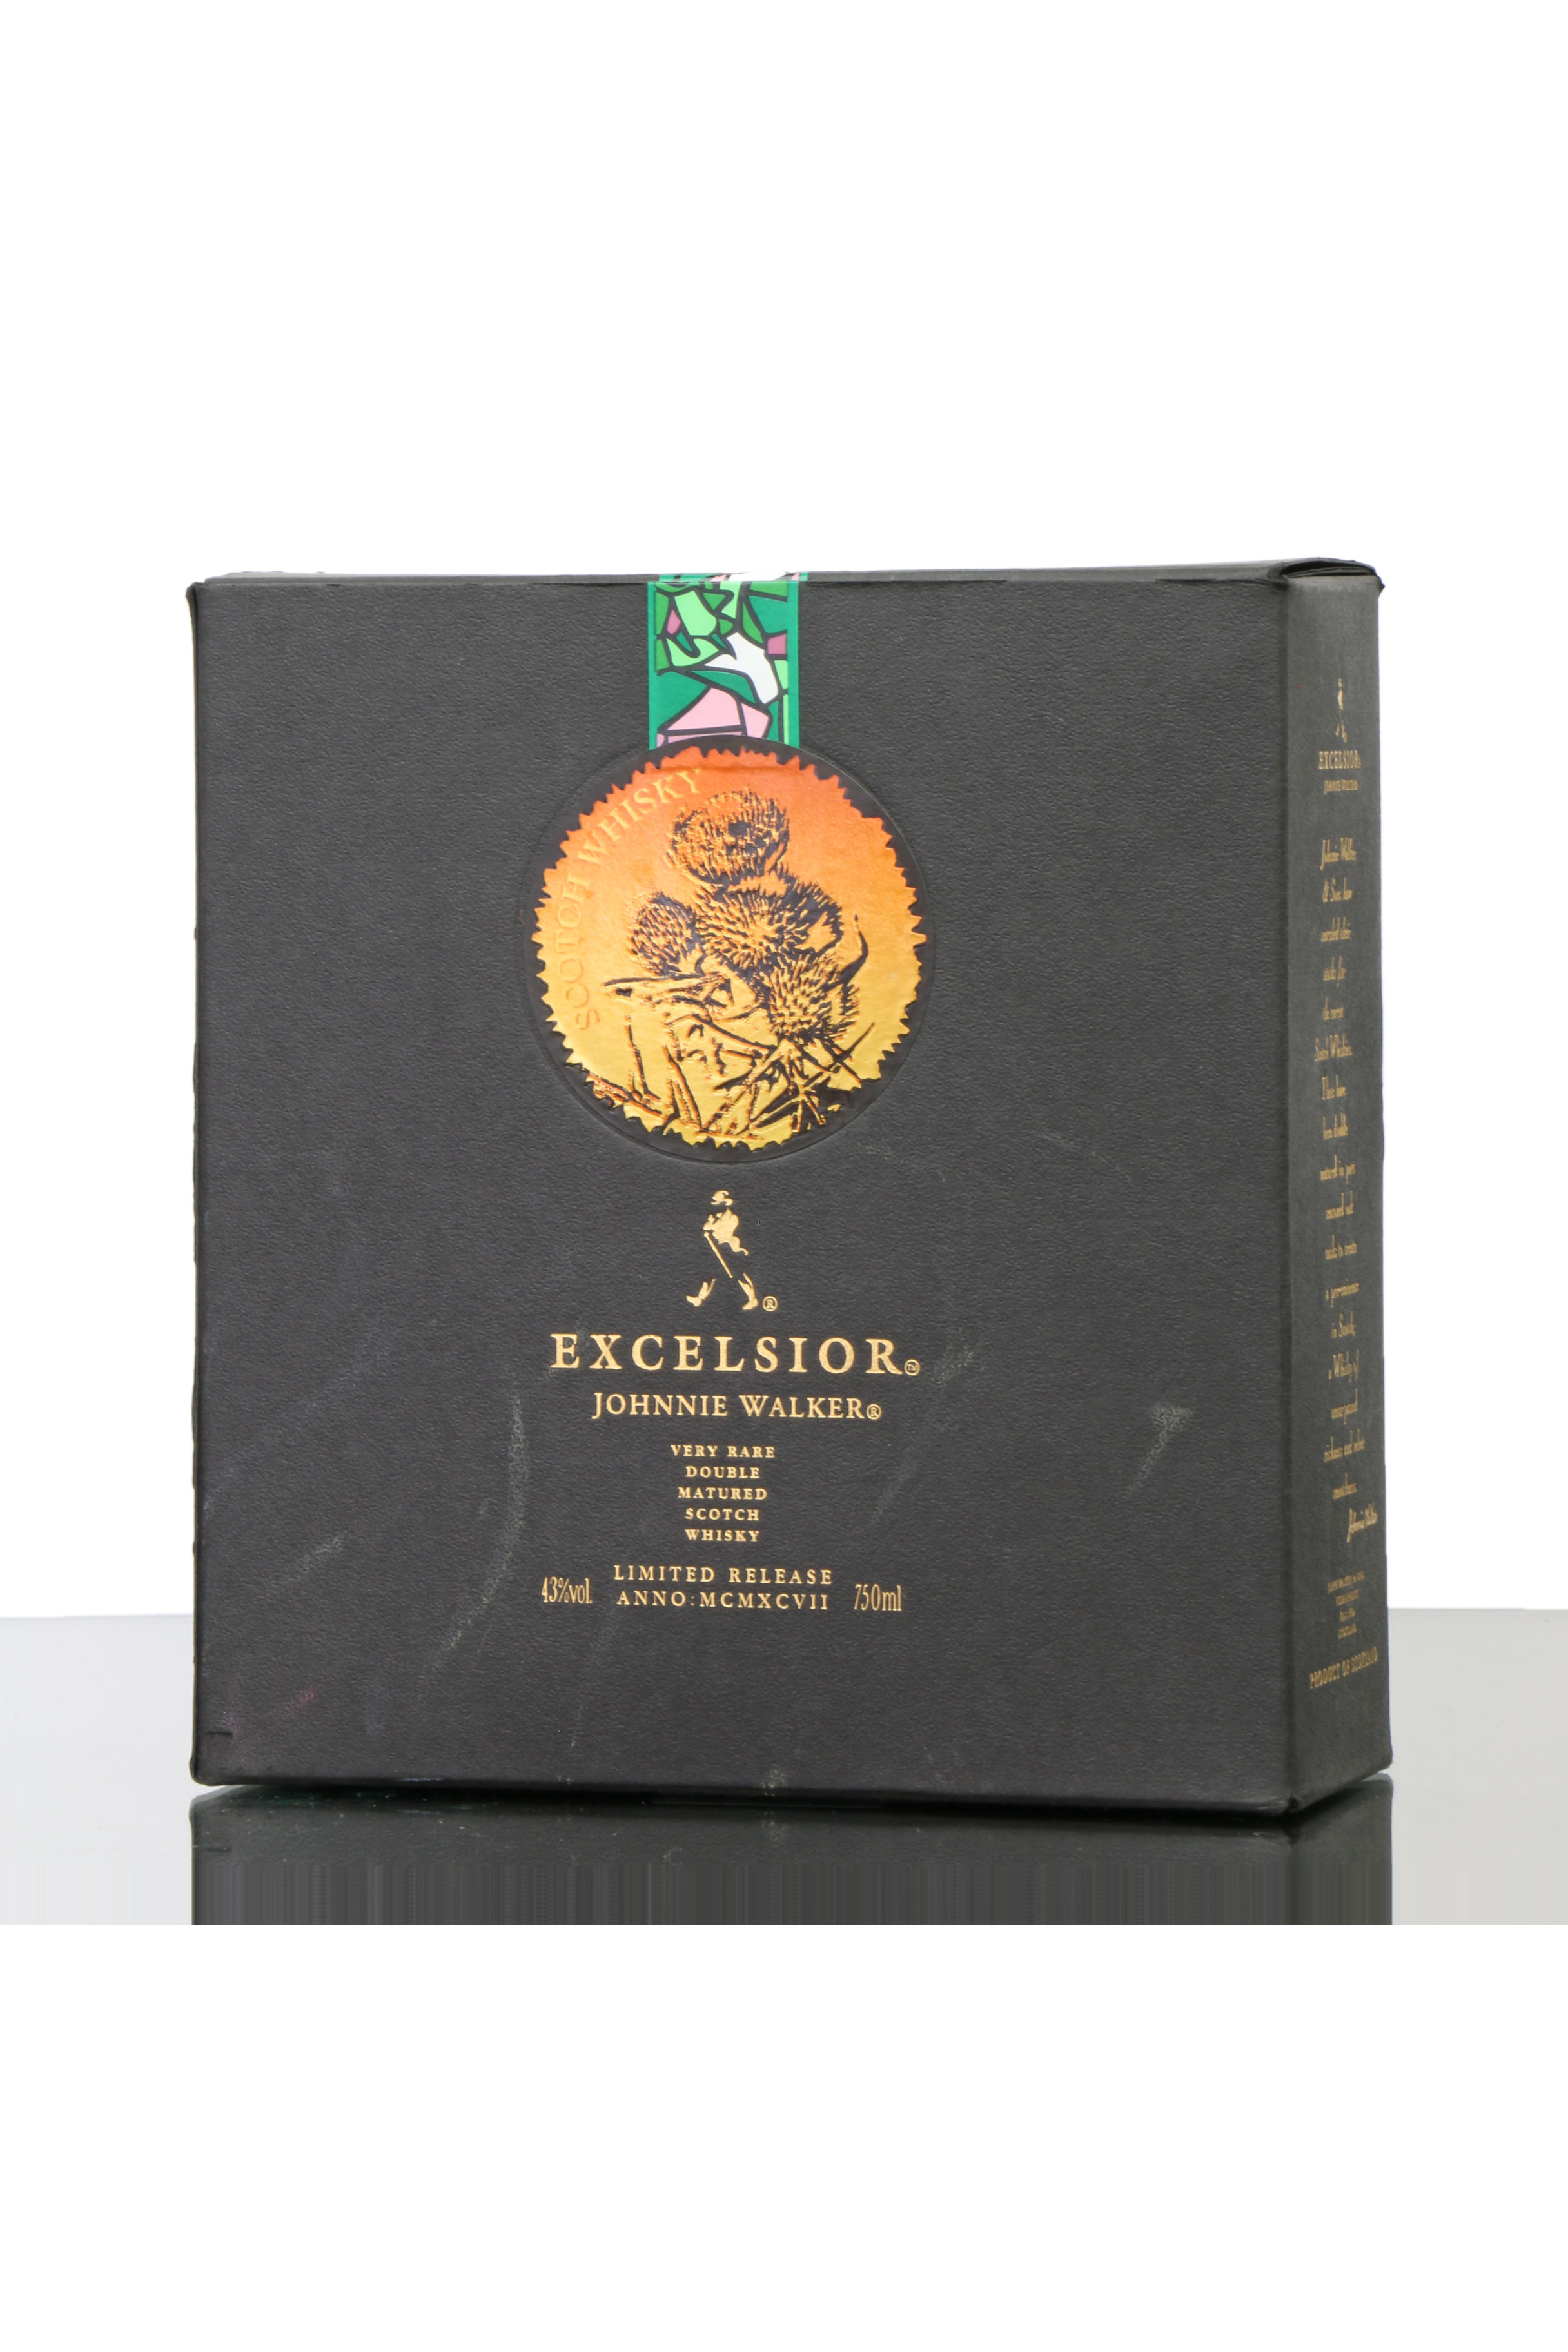 Johnnie Walker Excelsior Just Whisky Auctions 7138